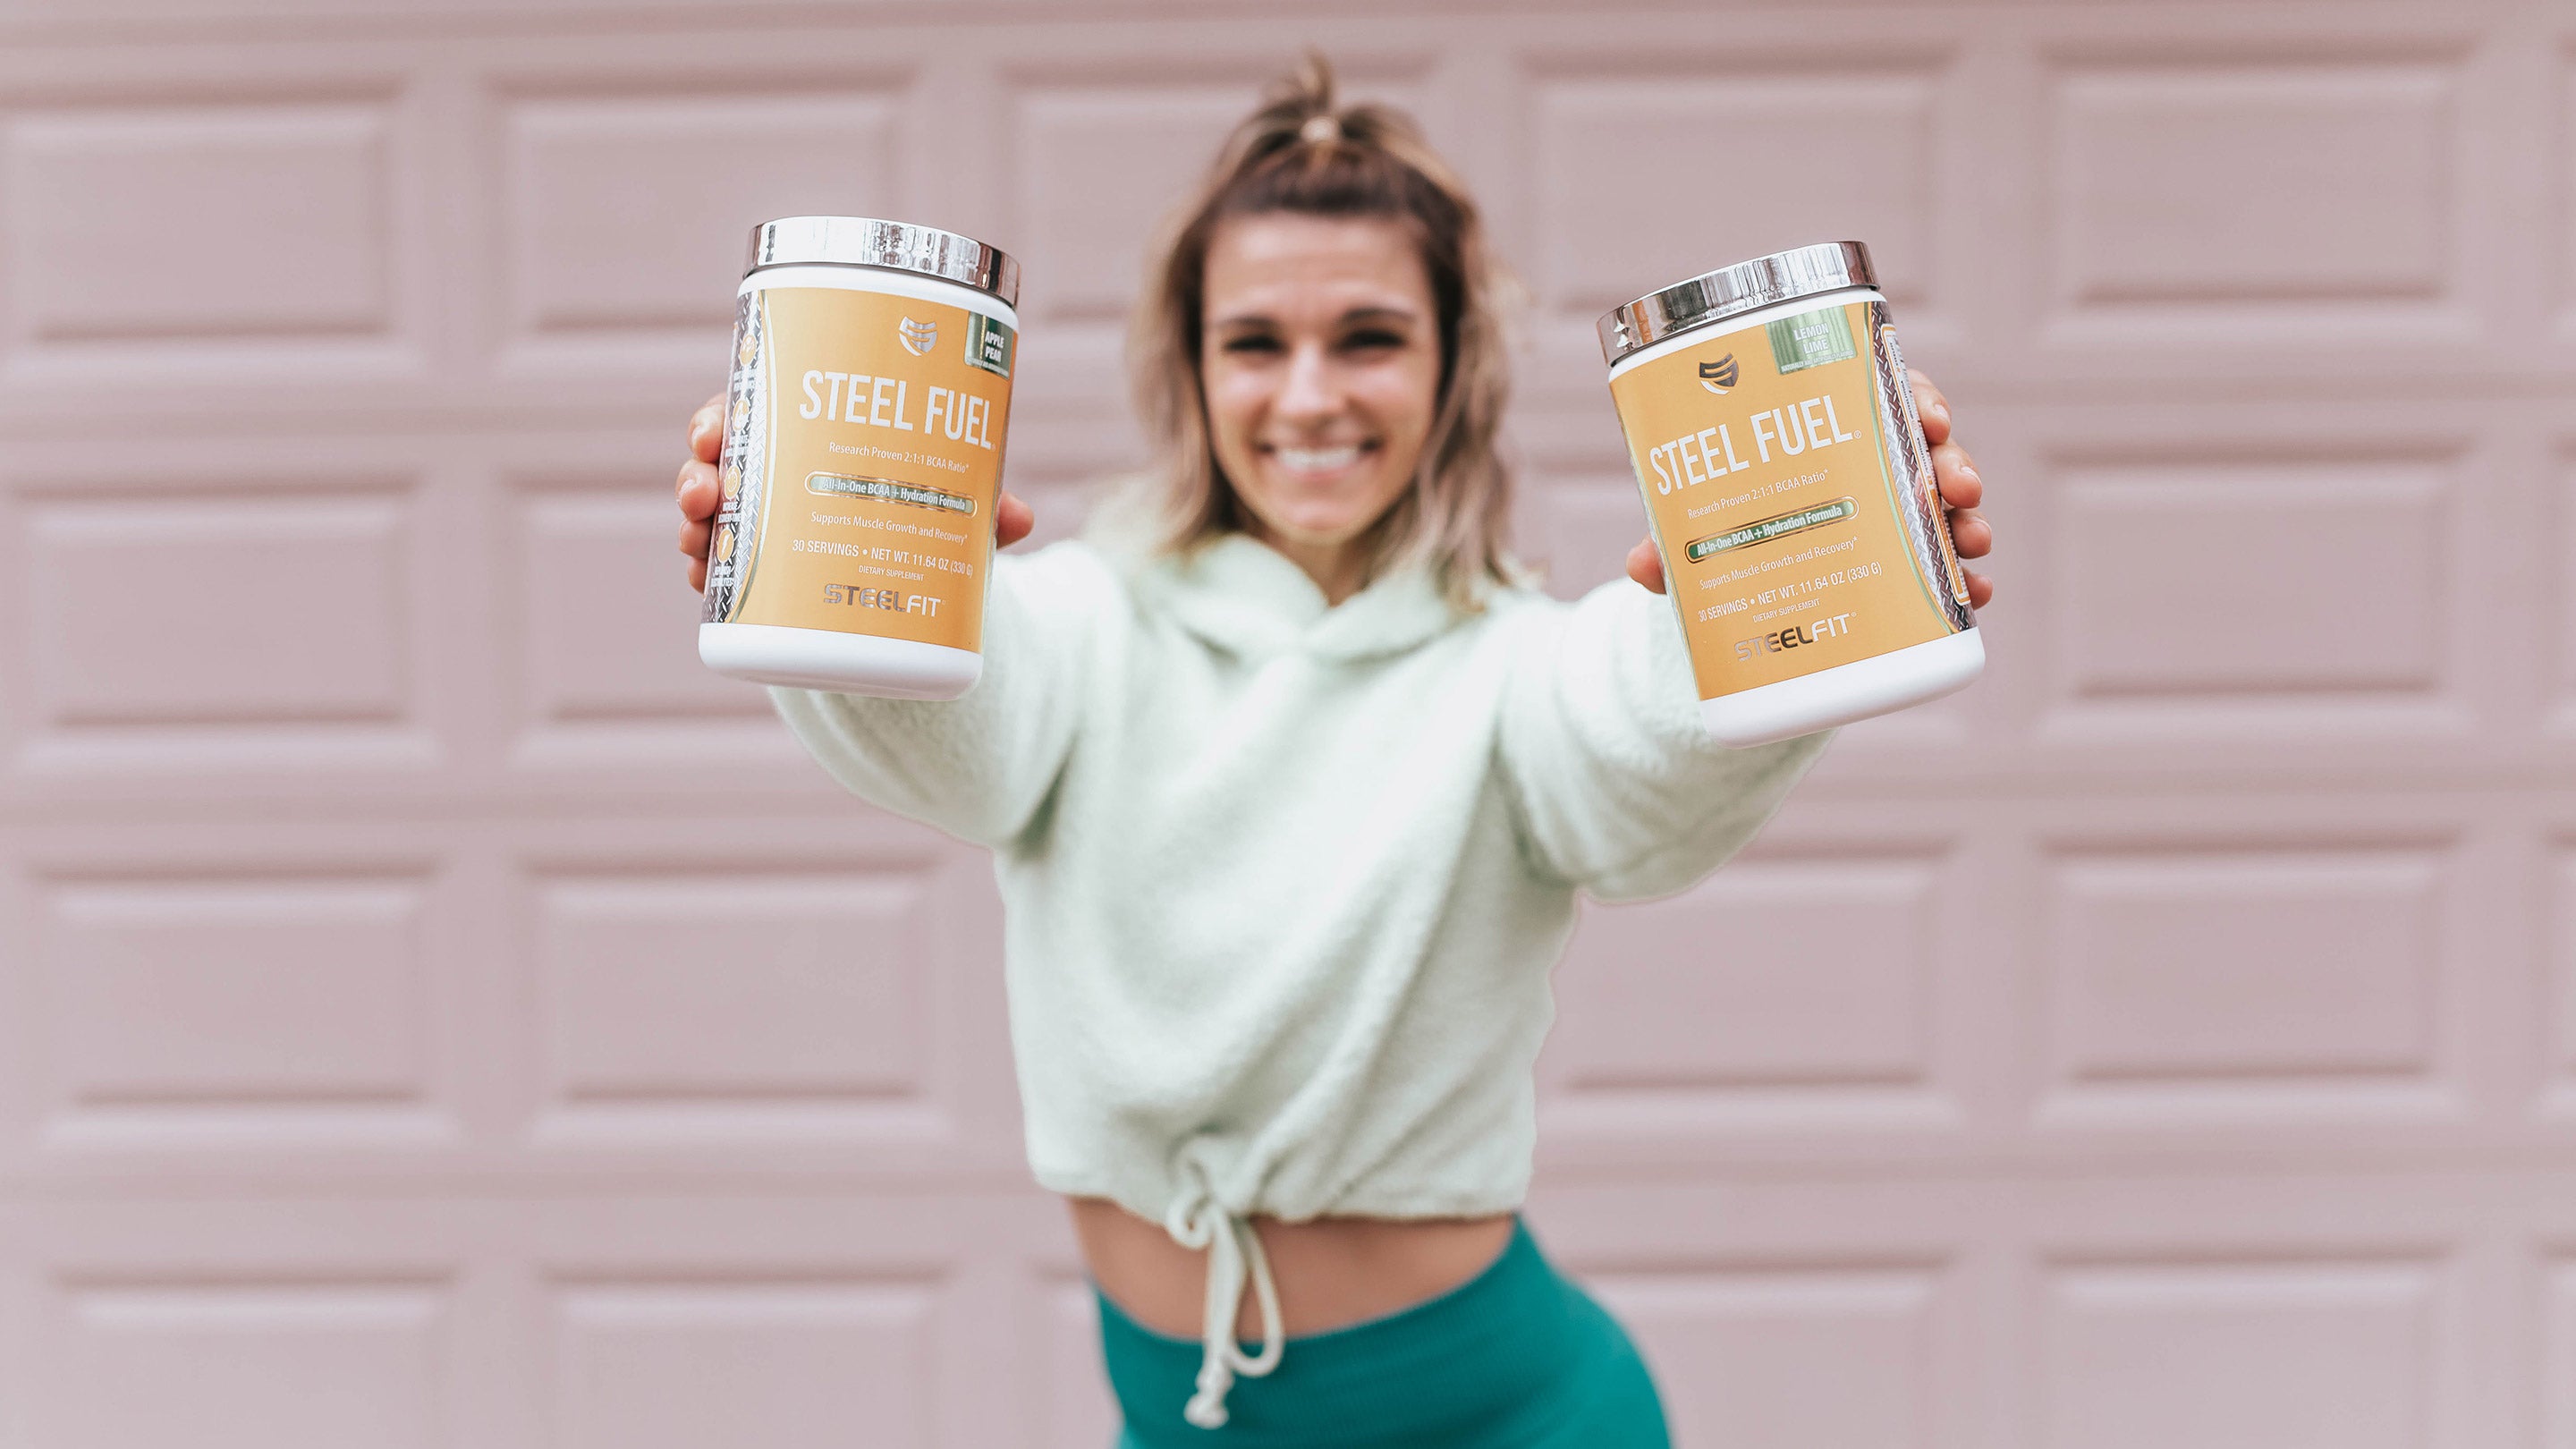 healthy fitness woman holding SteelFit supplements, weight loss, healthy lifestyle, build muscle